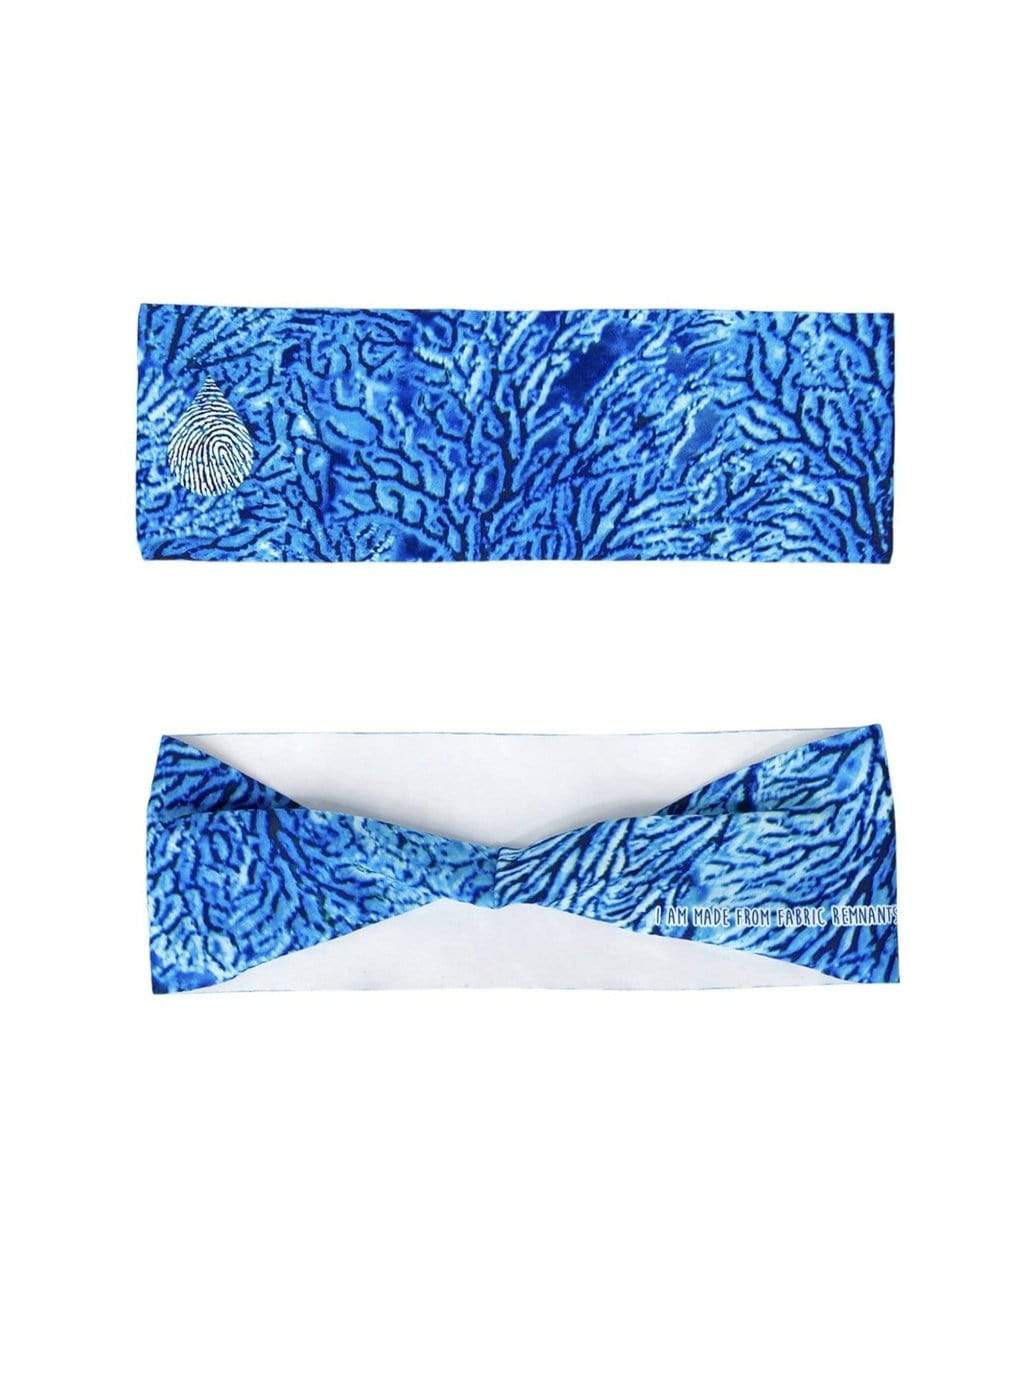 Sea Fan Headband front and back view on white background